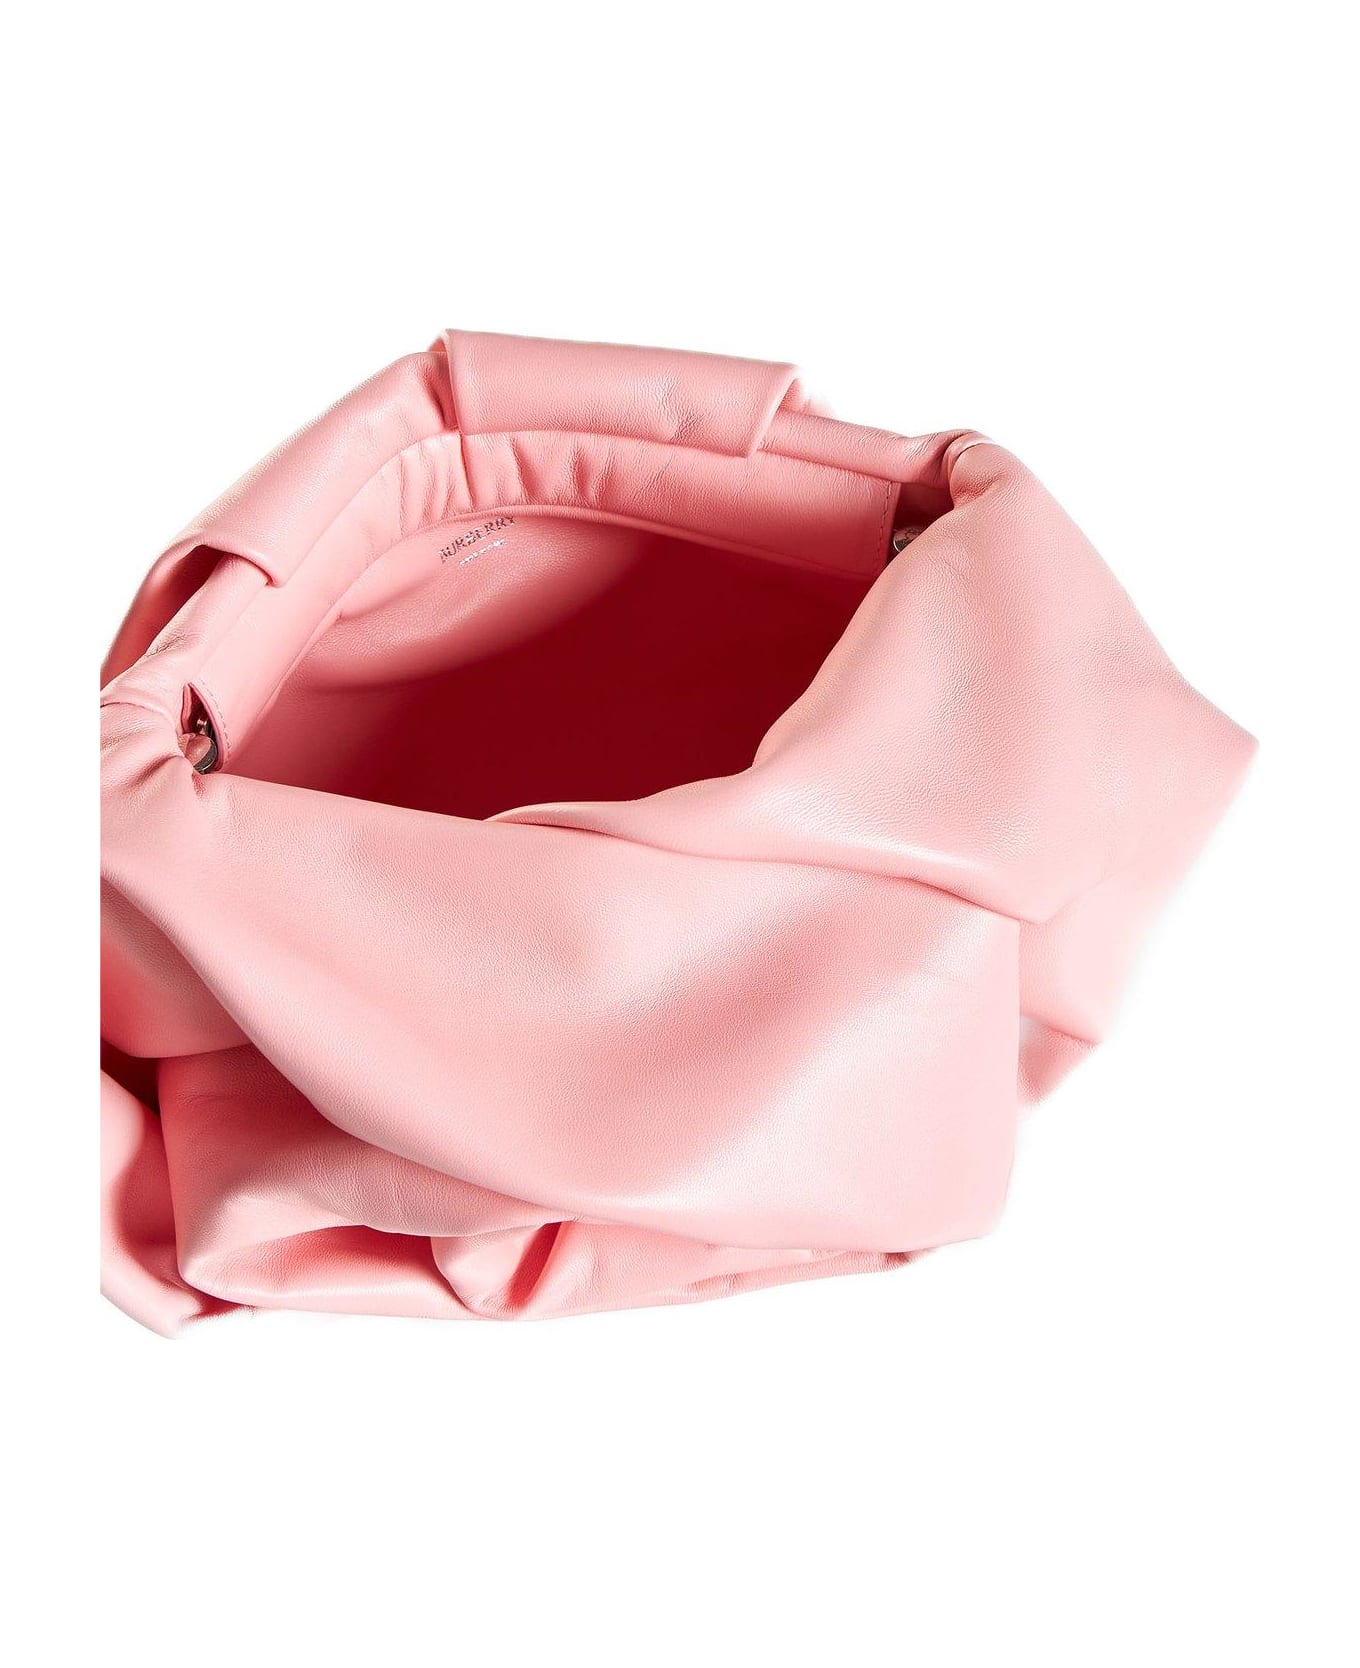 Burberry 3d Rose Ruched Clutch Bag - PINK トートバッグ